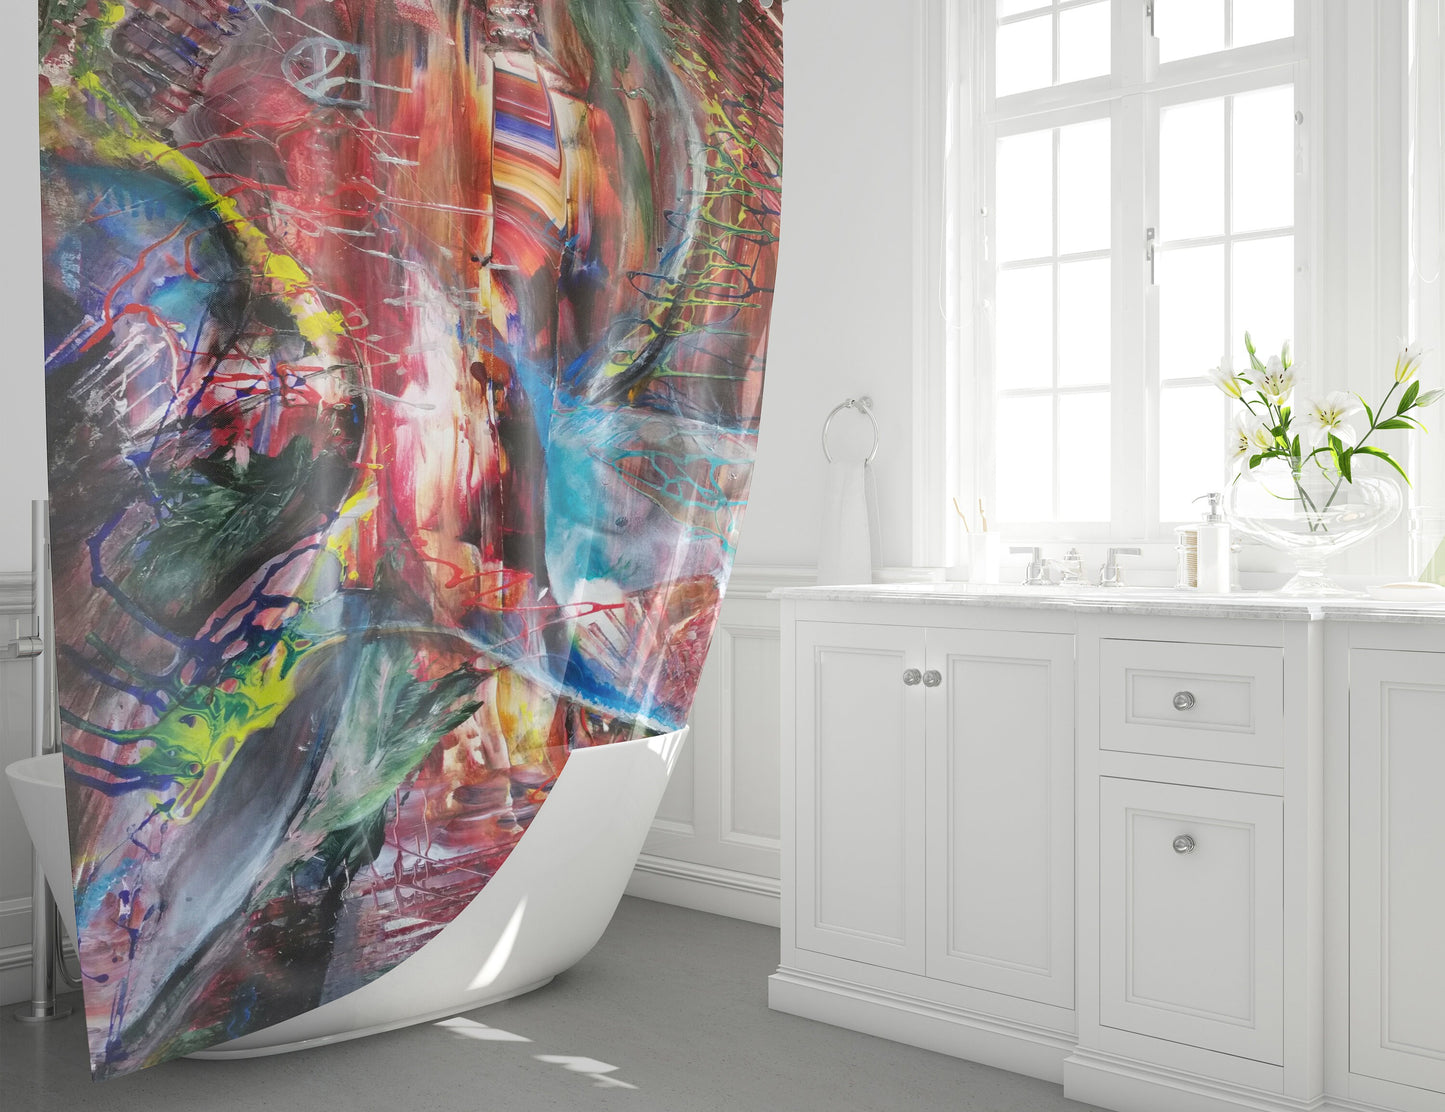 Abstract art shower curtain psychadelic shower curtain psychedelic shower curtain trippy bath decor colorful shower curtain red blue orange